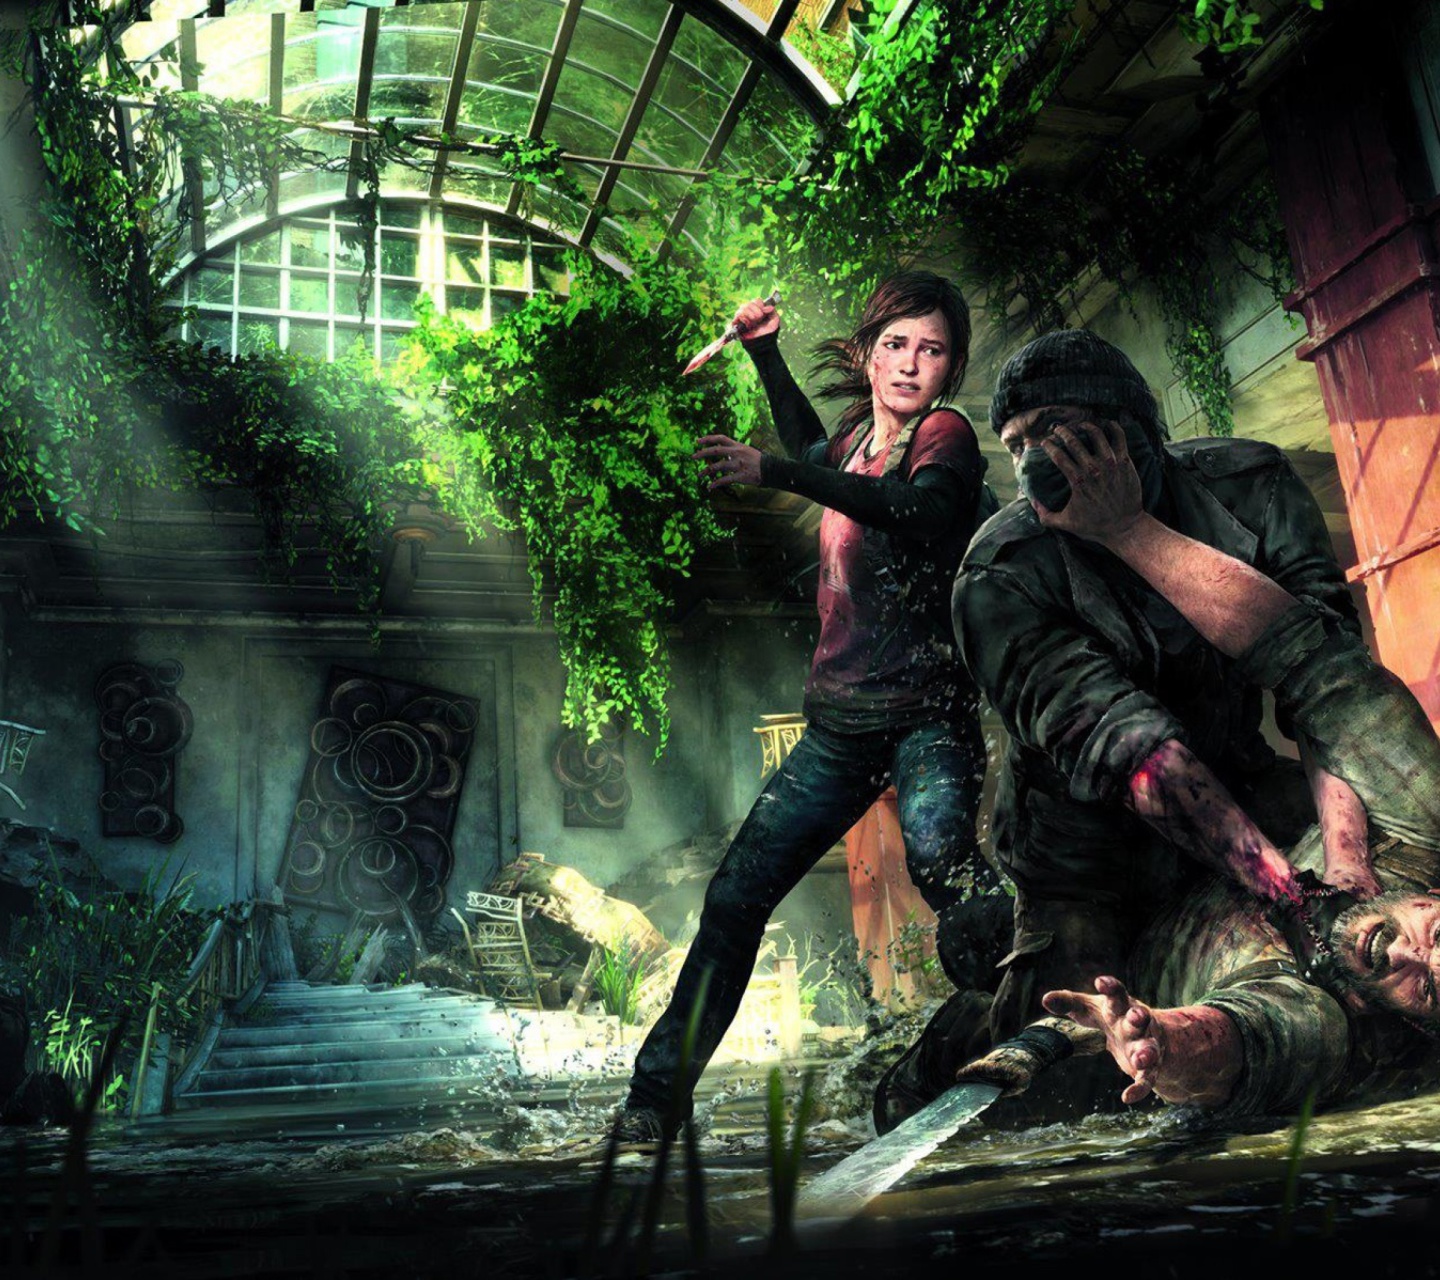 The Last Of Us Naughty Dog for Playstation 3 wallpaper 1440x1280